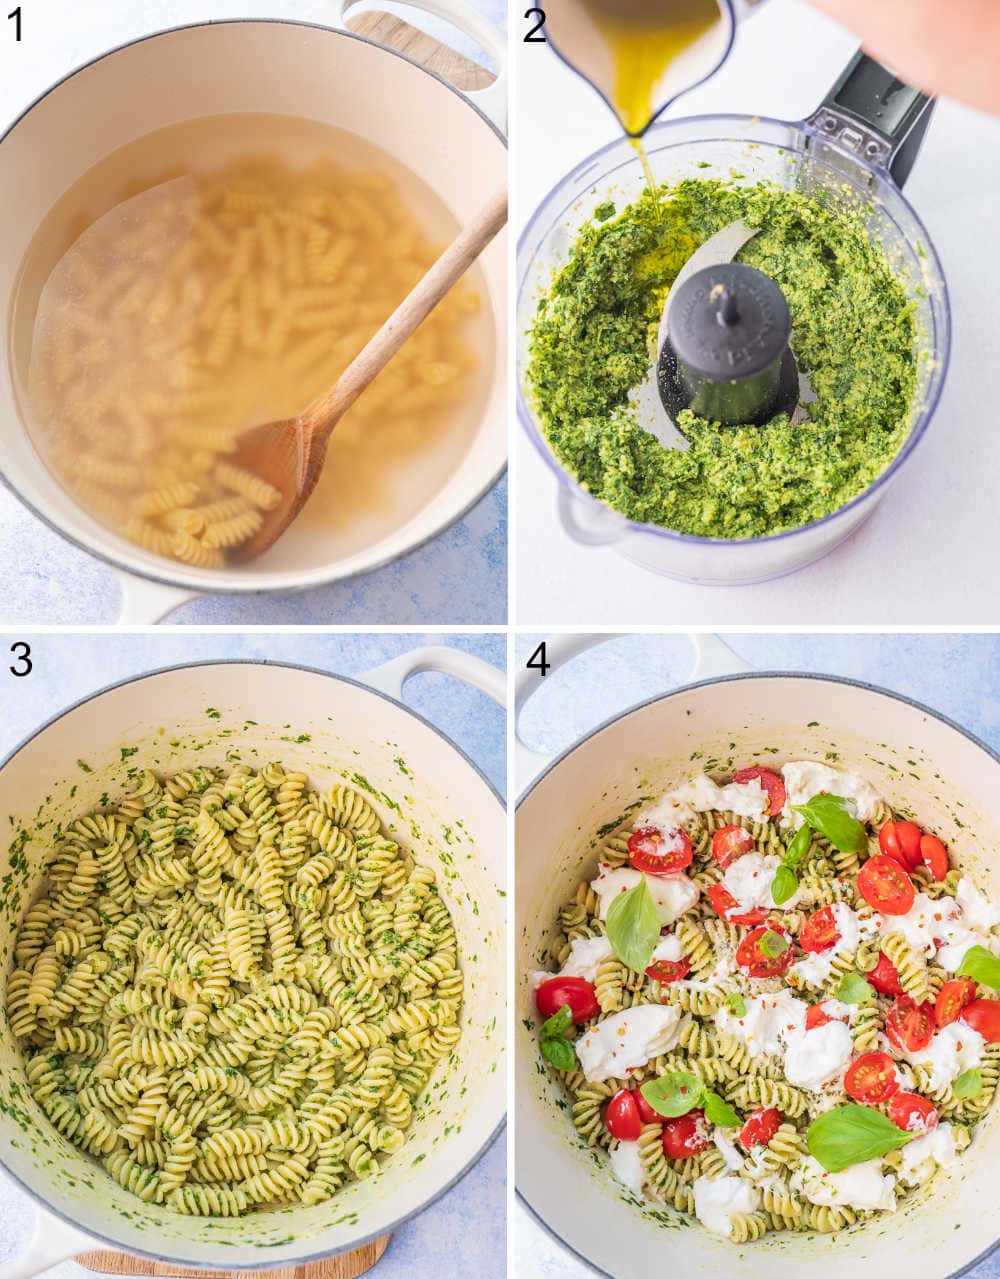 A collage of 4 photos showing preparation steps of burrata pasta.